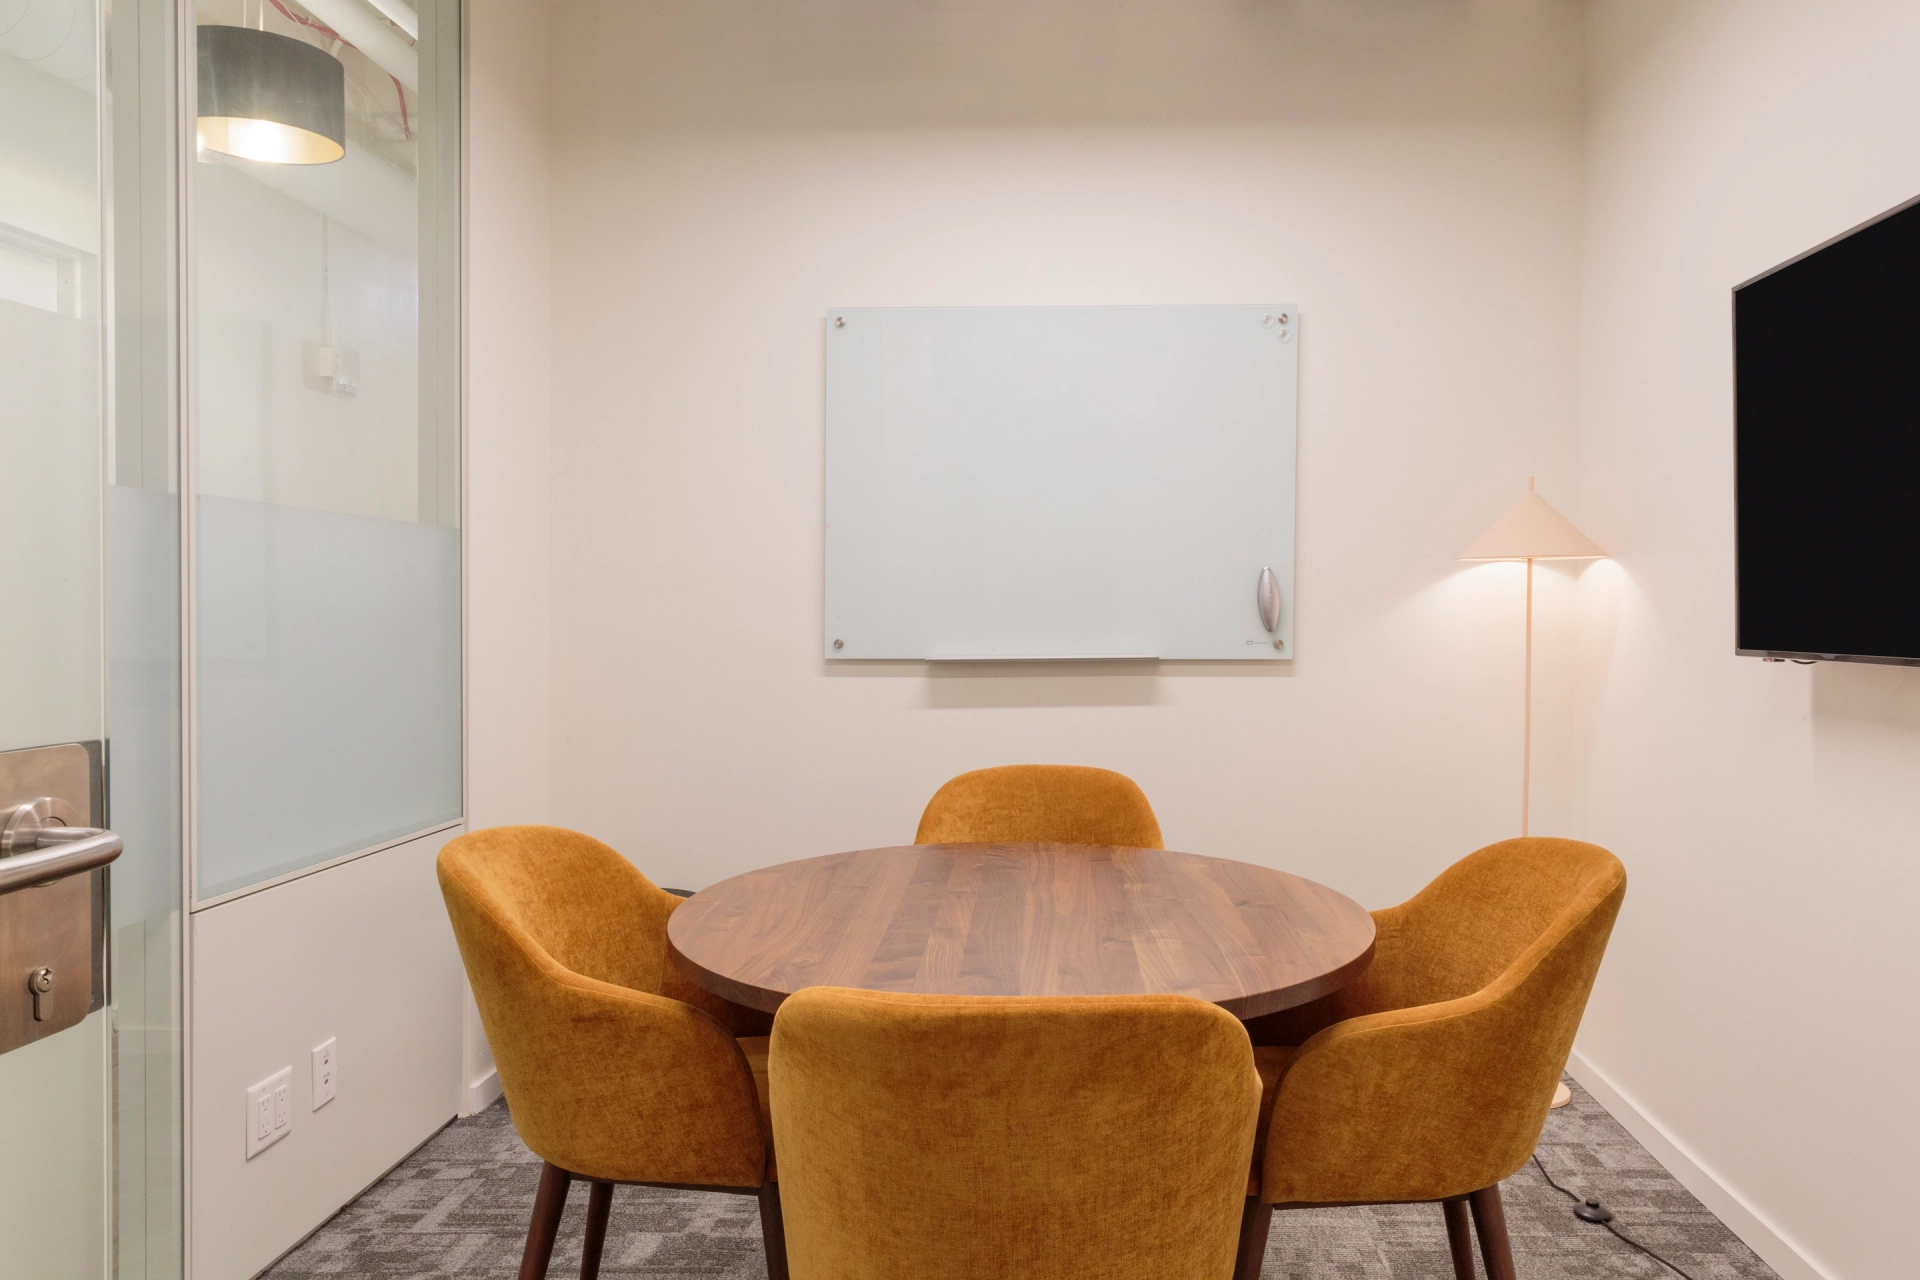 A Manhattan office meeting room equipped with a table, chairs, and a TV.